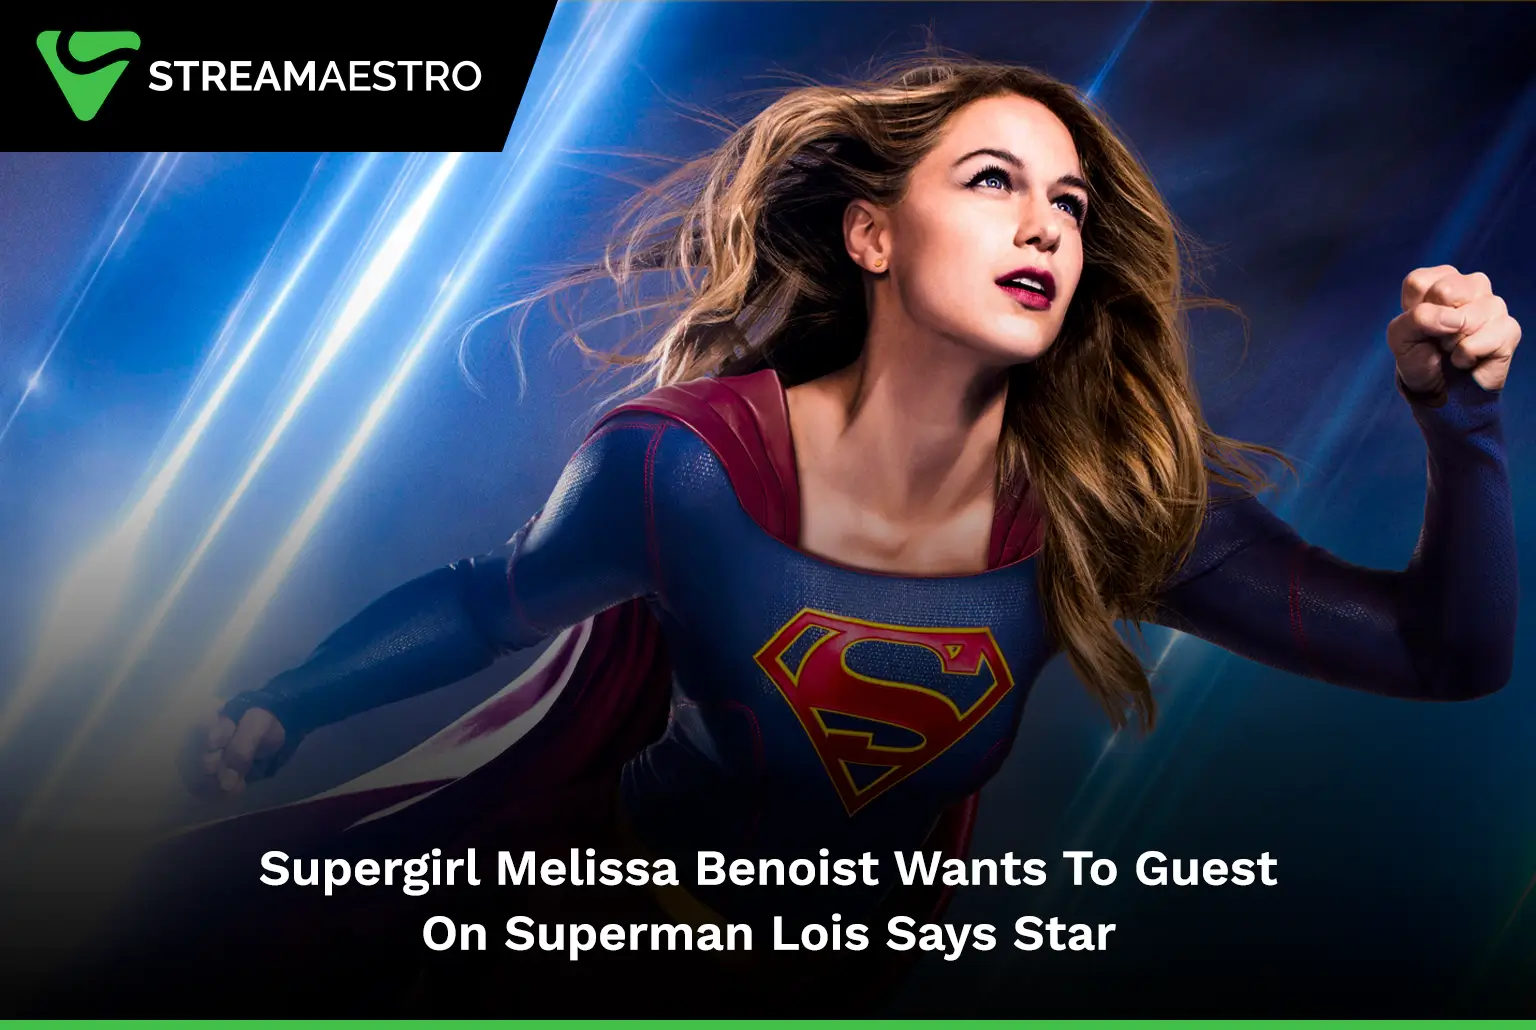 Supergirl’s Melissa Benoist Wants To Guest On Superman & Lois, Says Star